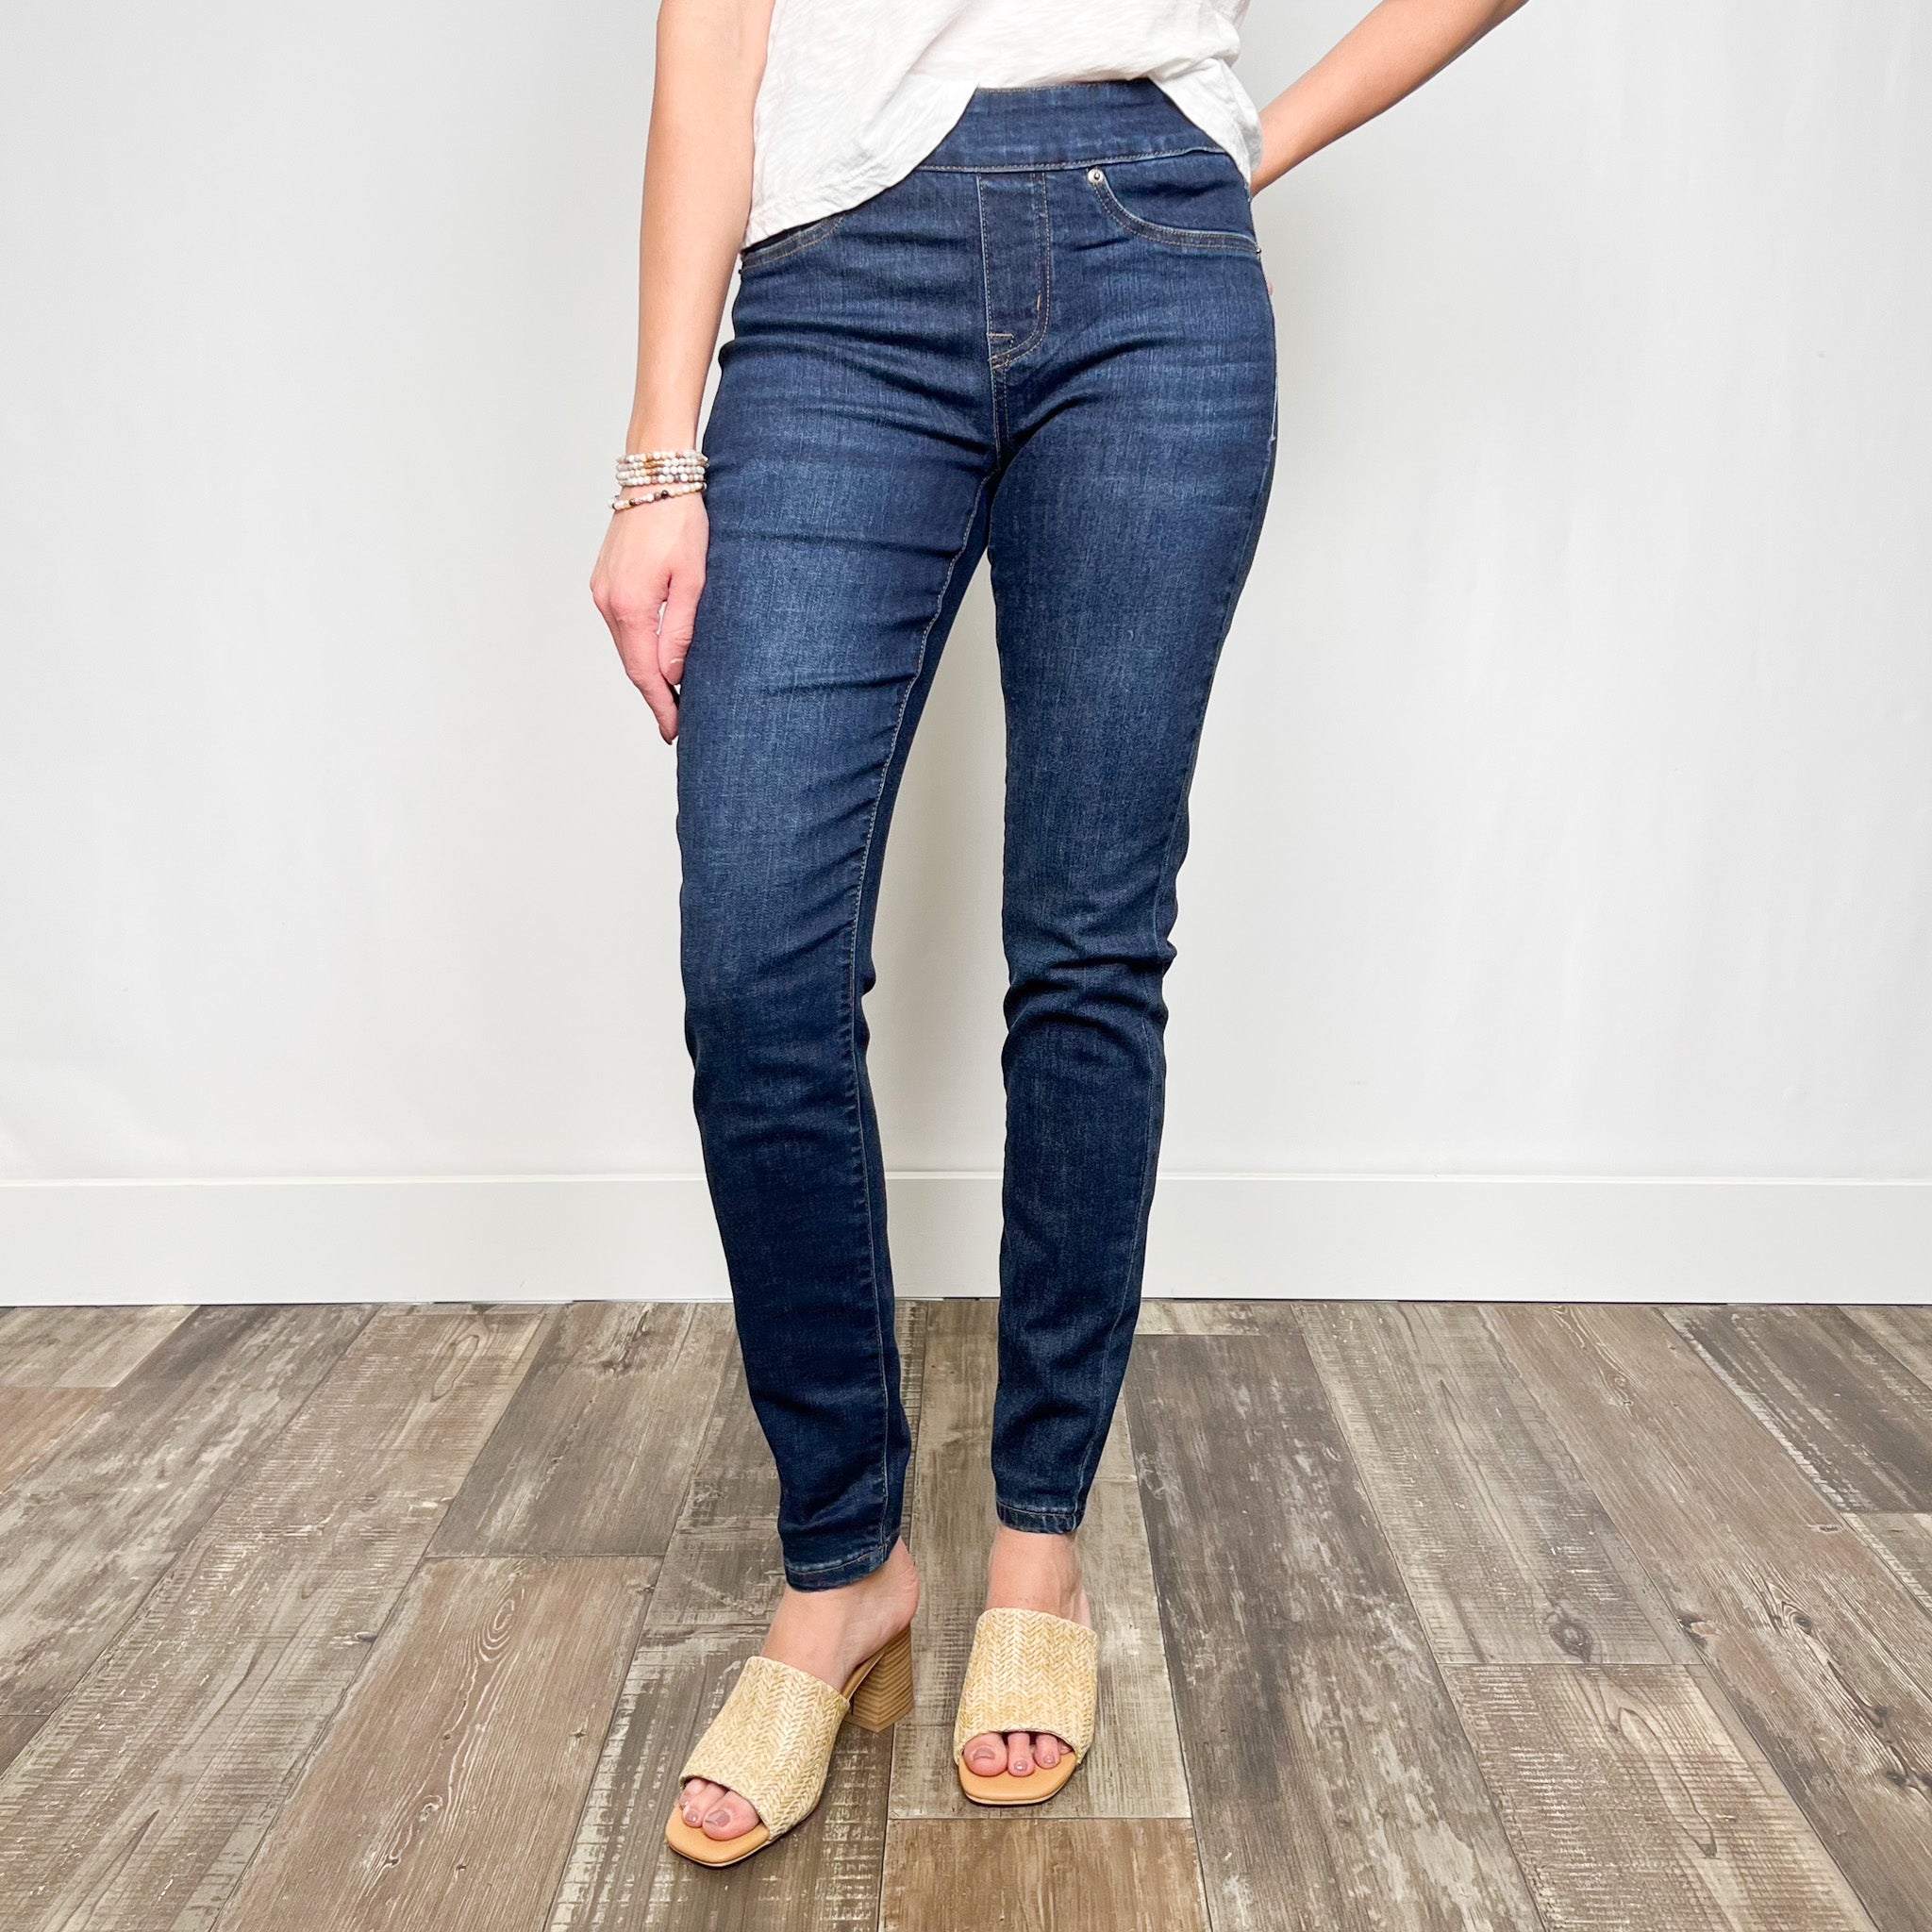 Audrey Pull on Jegging Pant